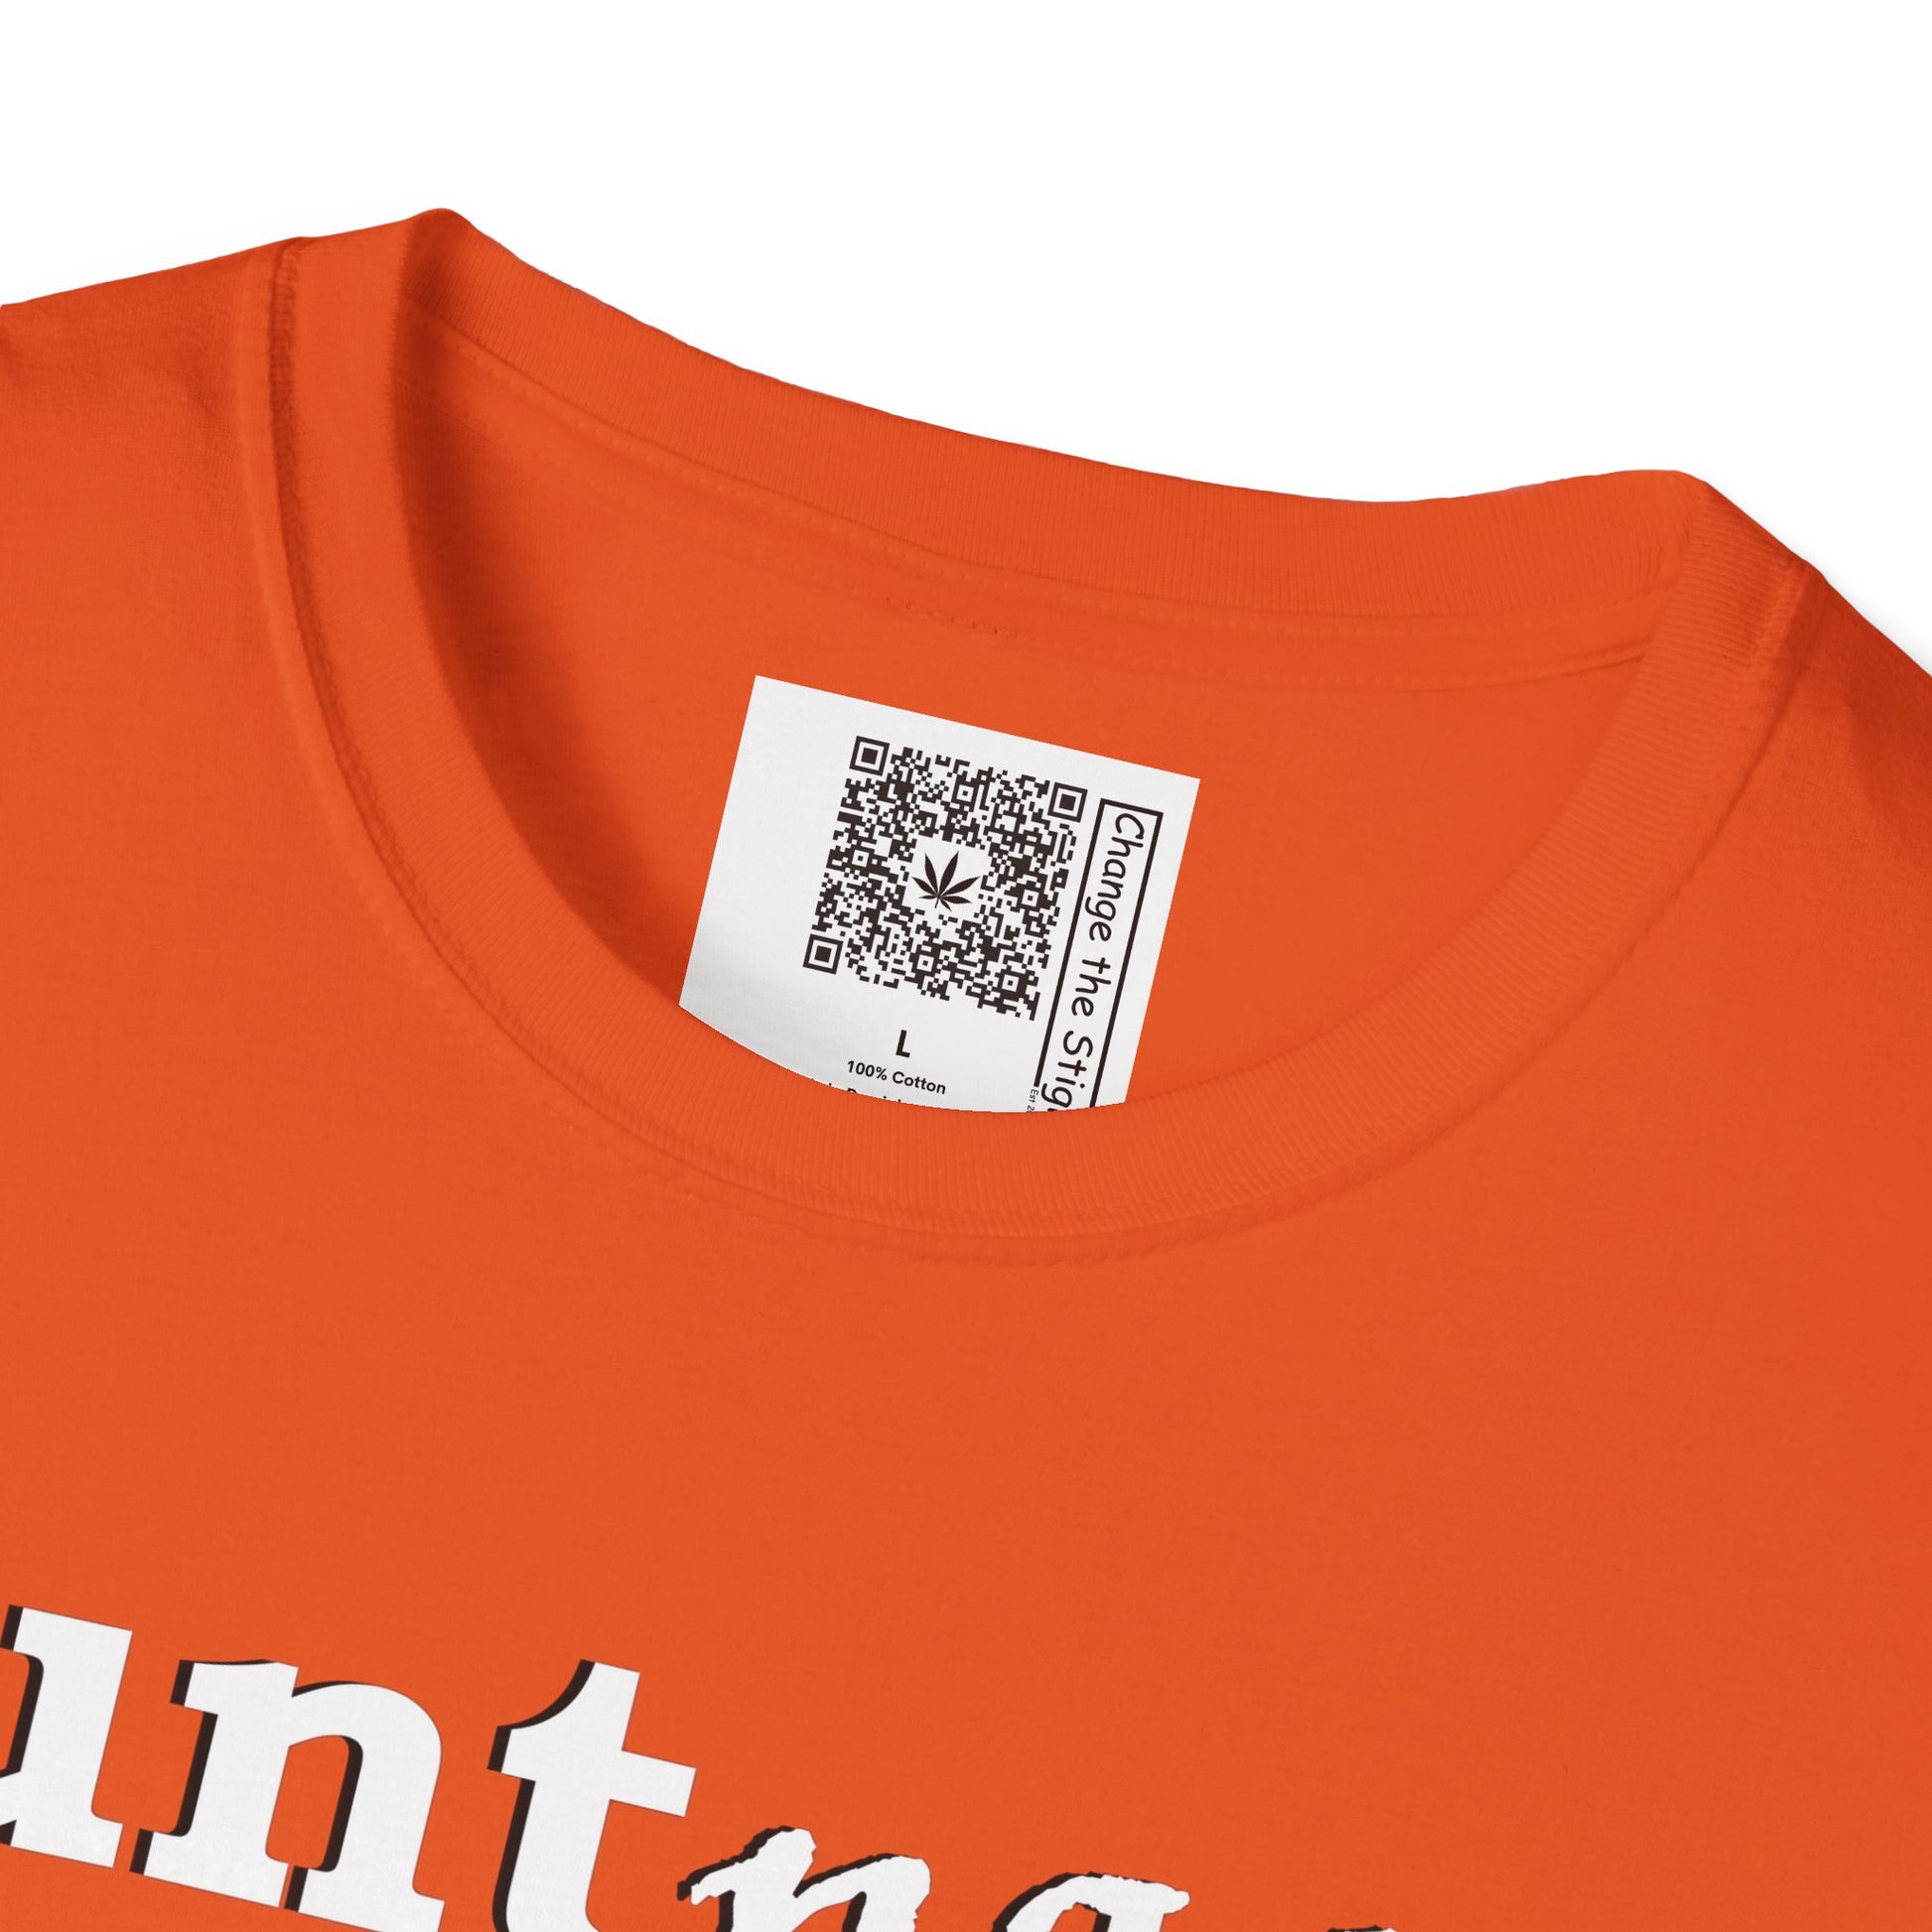 Change the Stigma, Orange color, shirt saying "blunt passer", Shirt is open displayed, Qr code is shown neck tag